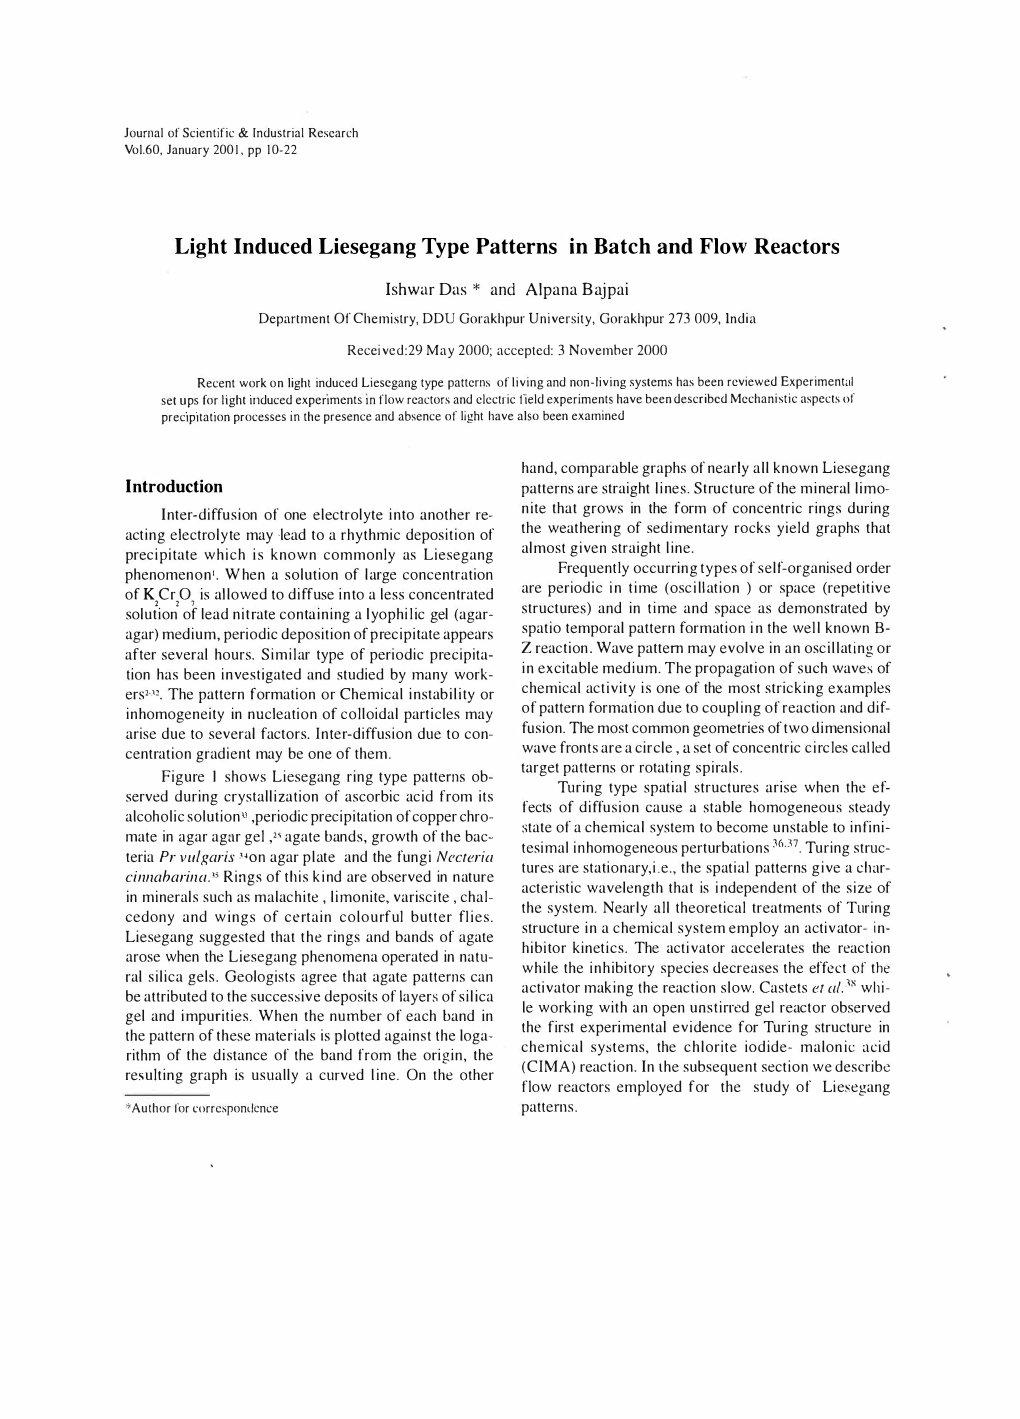 Light Induced Liesegang Type Patterns in Batch and Flow Reactors